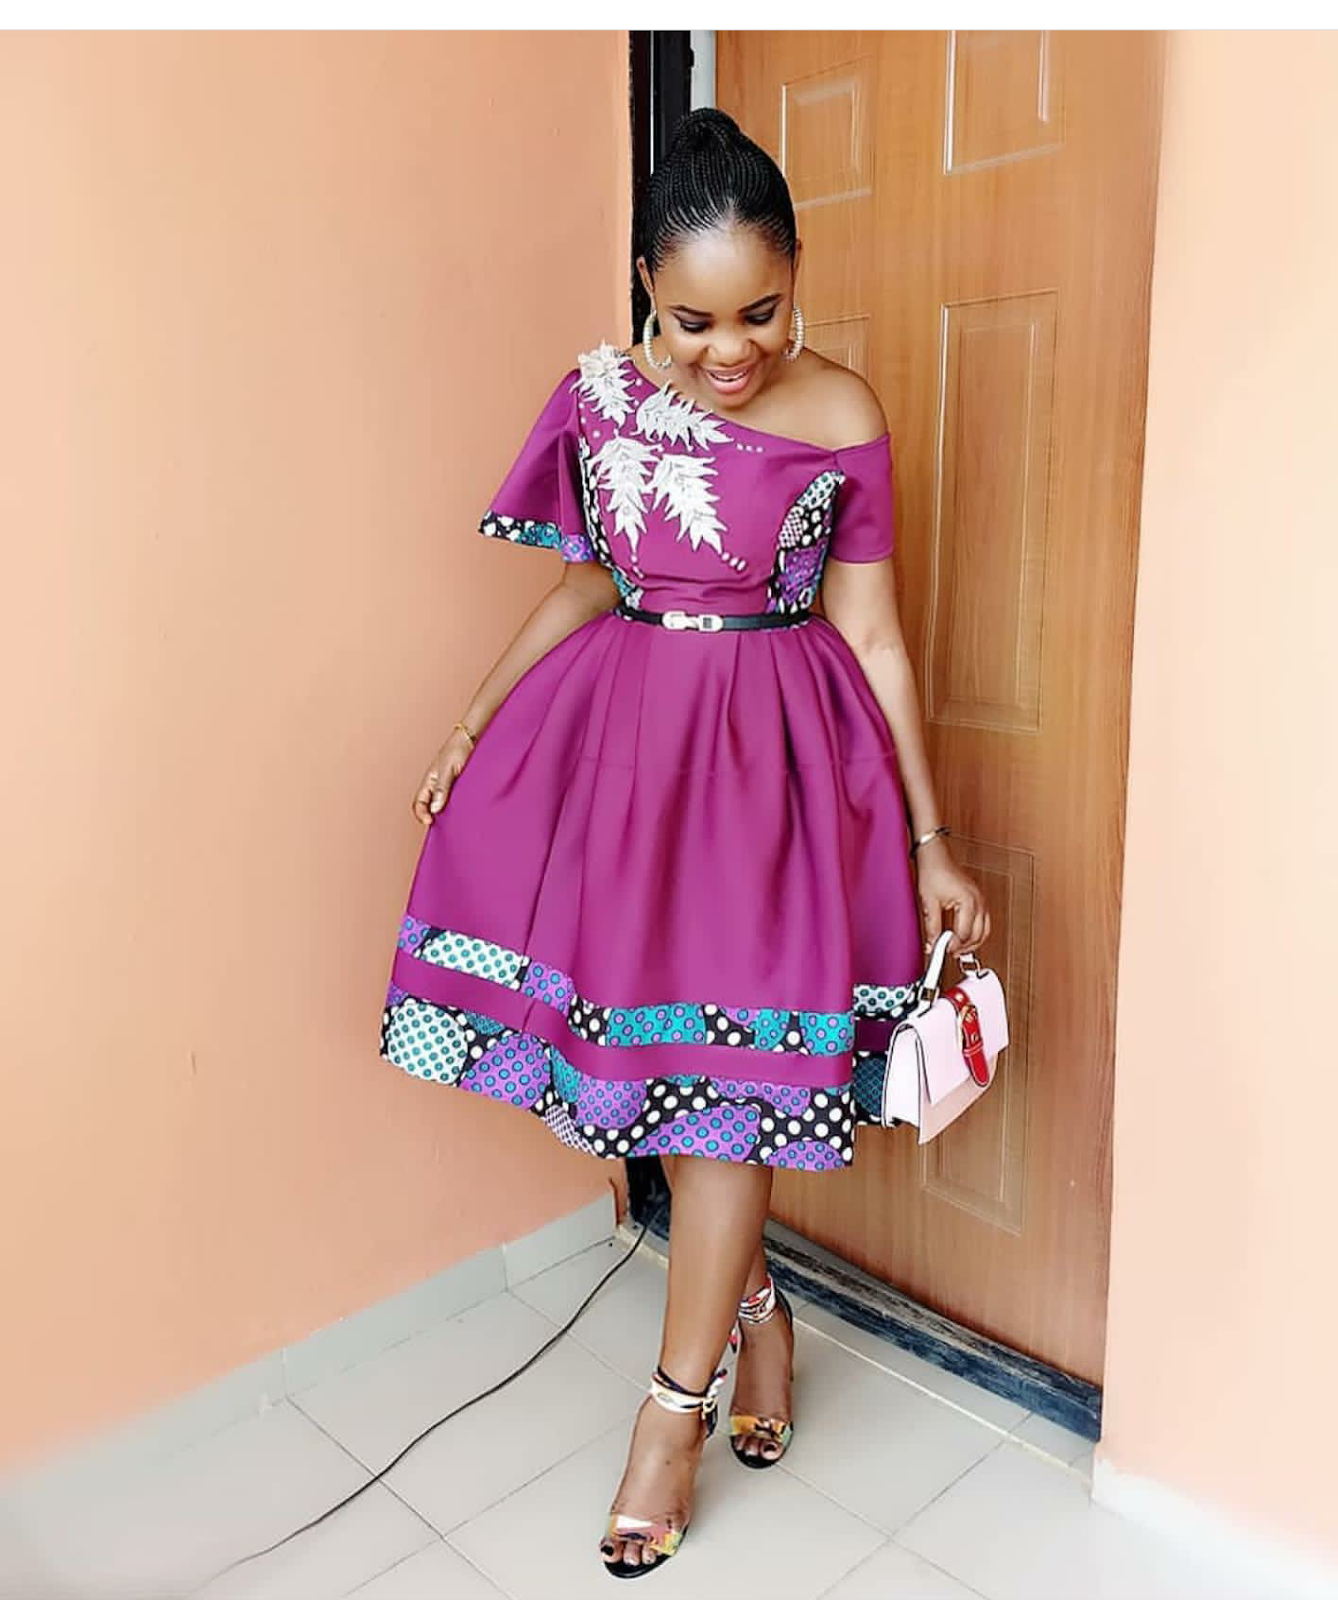 Latest Ankara Fashion Styles 2019 The Most Alluring And Breathtaking African Ankara Dresses For